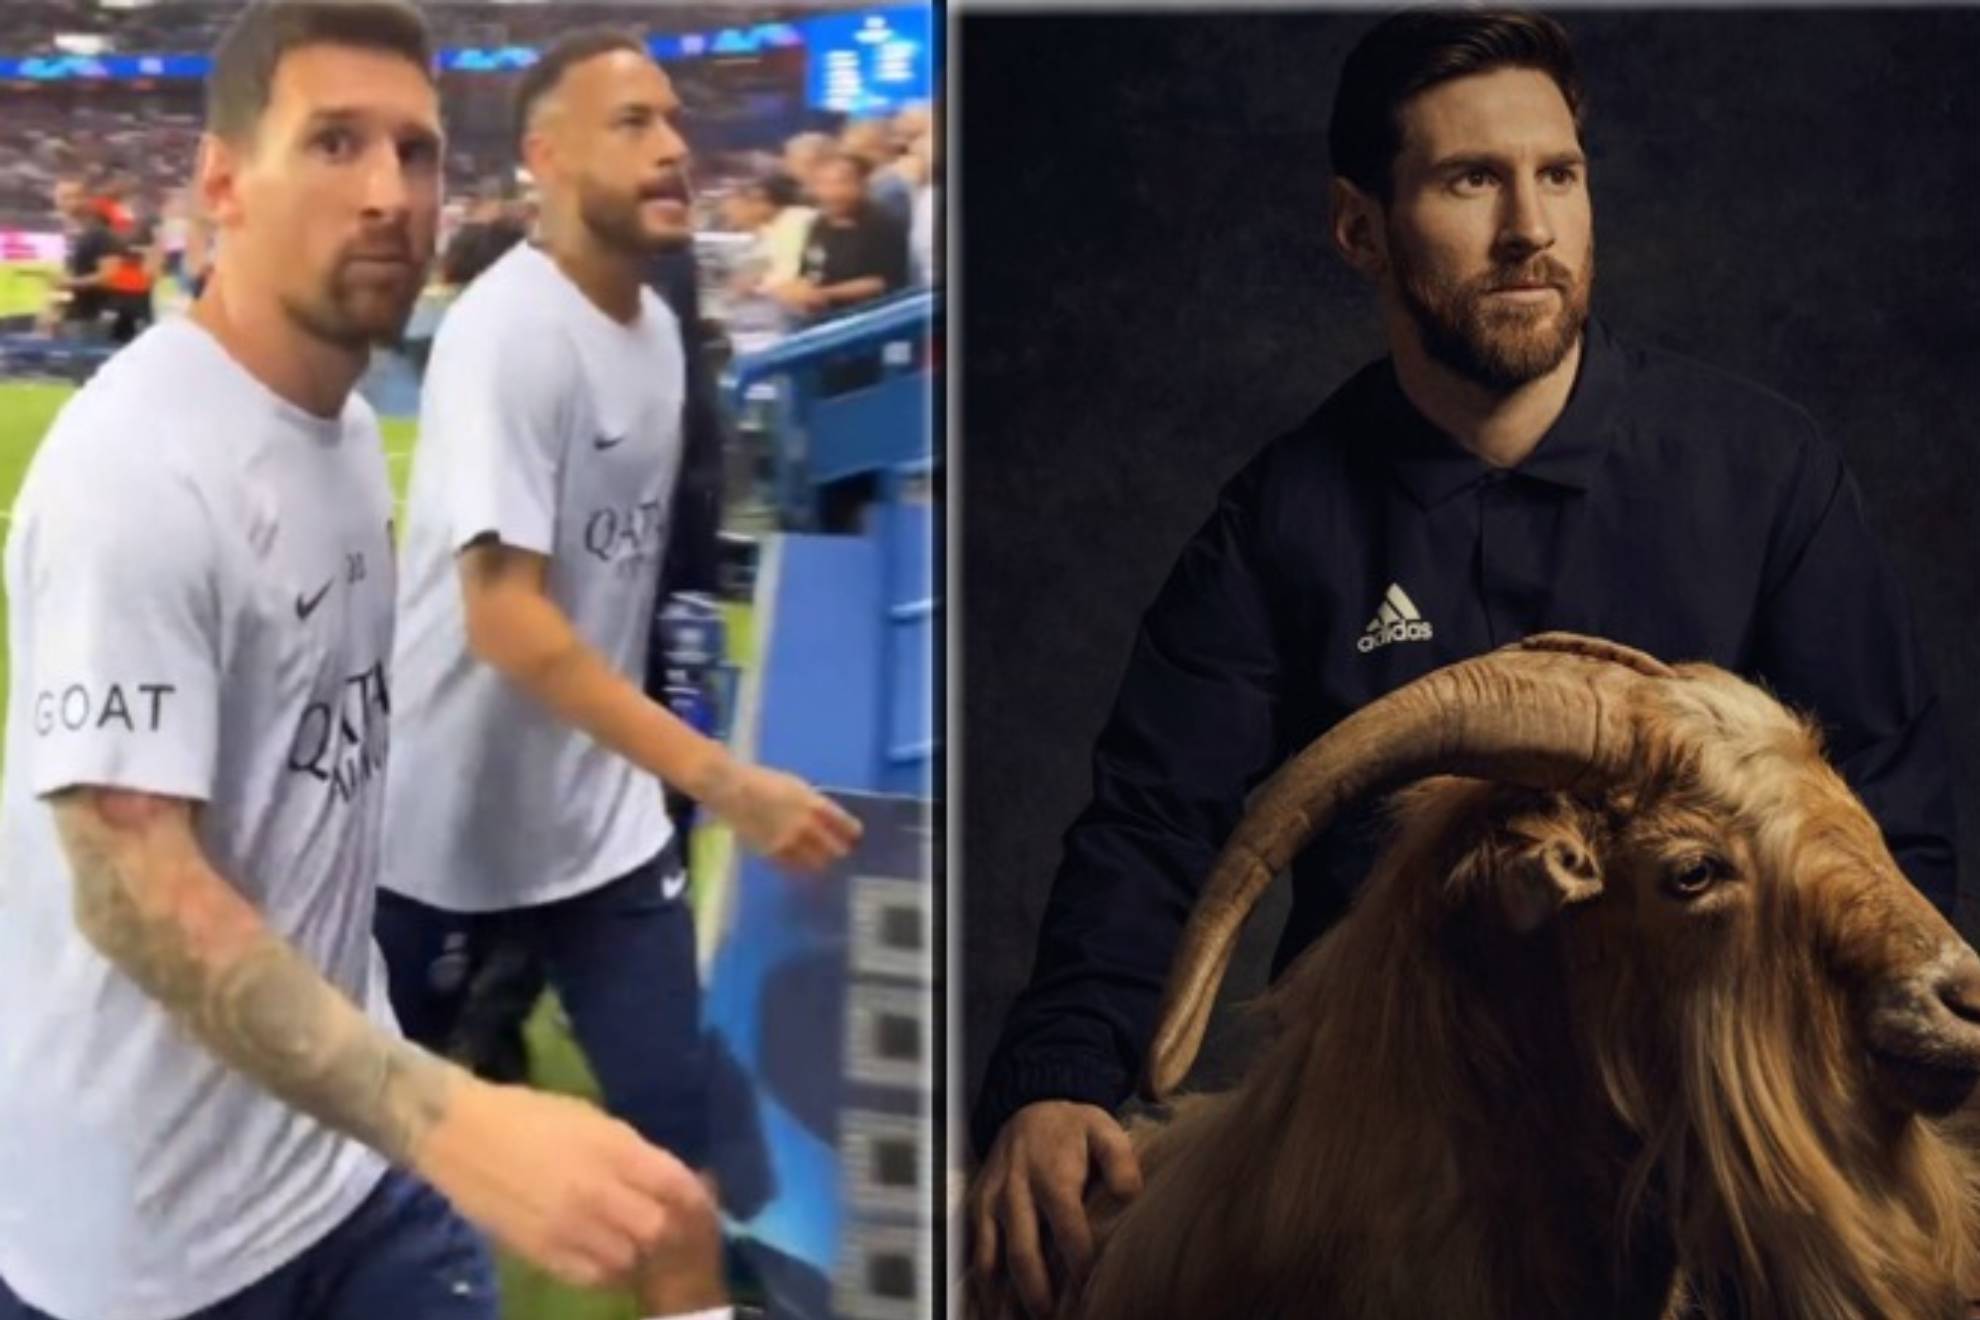 The curious case of Messi's PSG sleeve: Why was he the only player with 'GOAT' on his shirt?